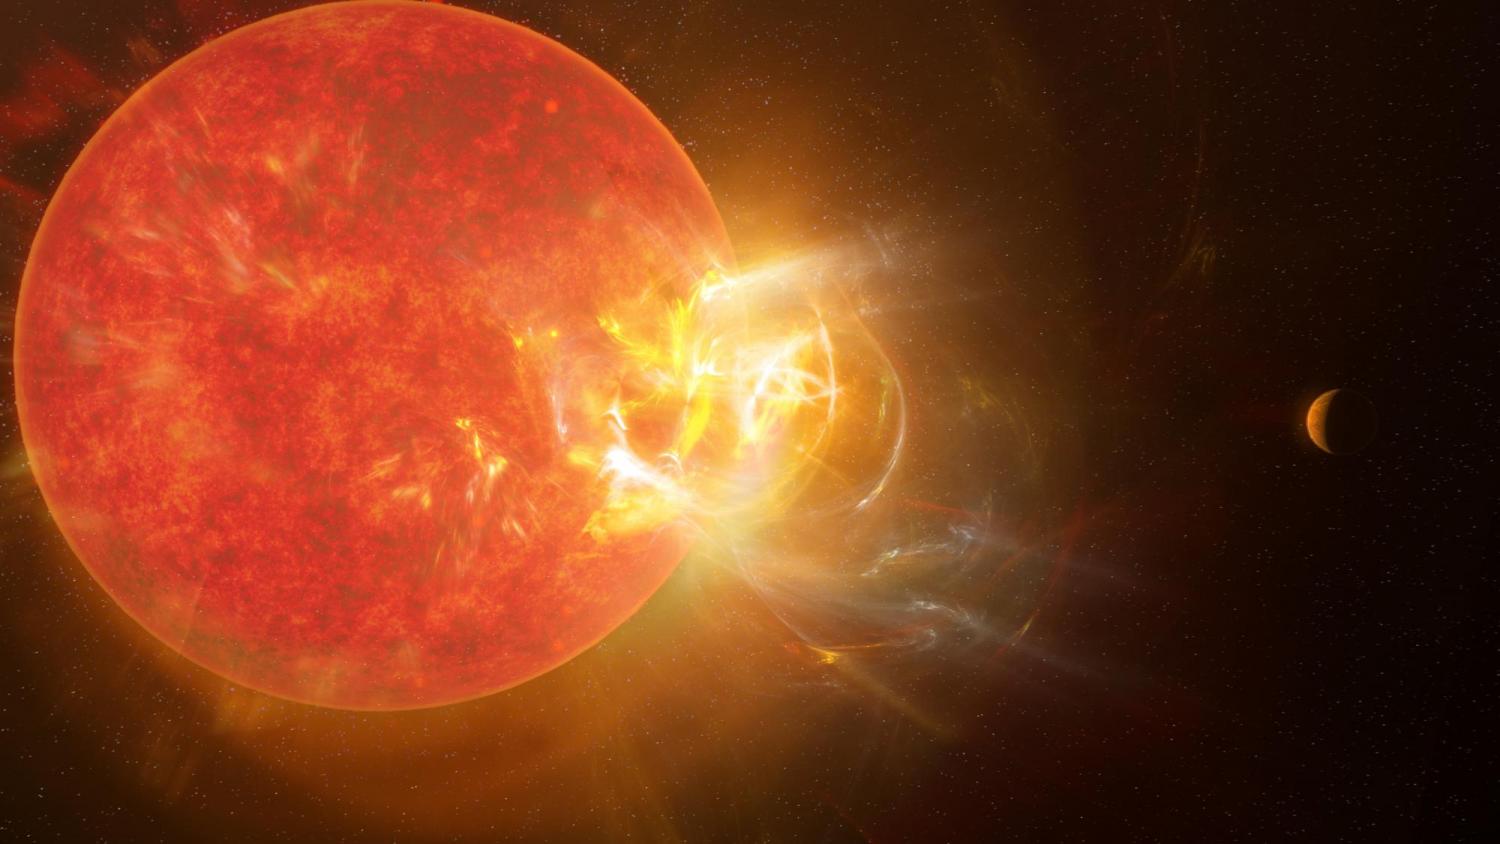 Proxima Centauri shoots out humongous flare, with big implications for alien life thumbnail